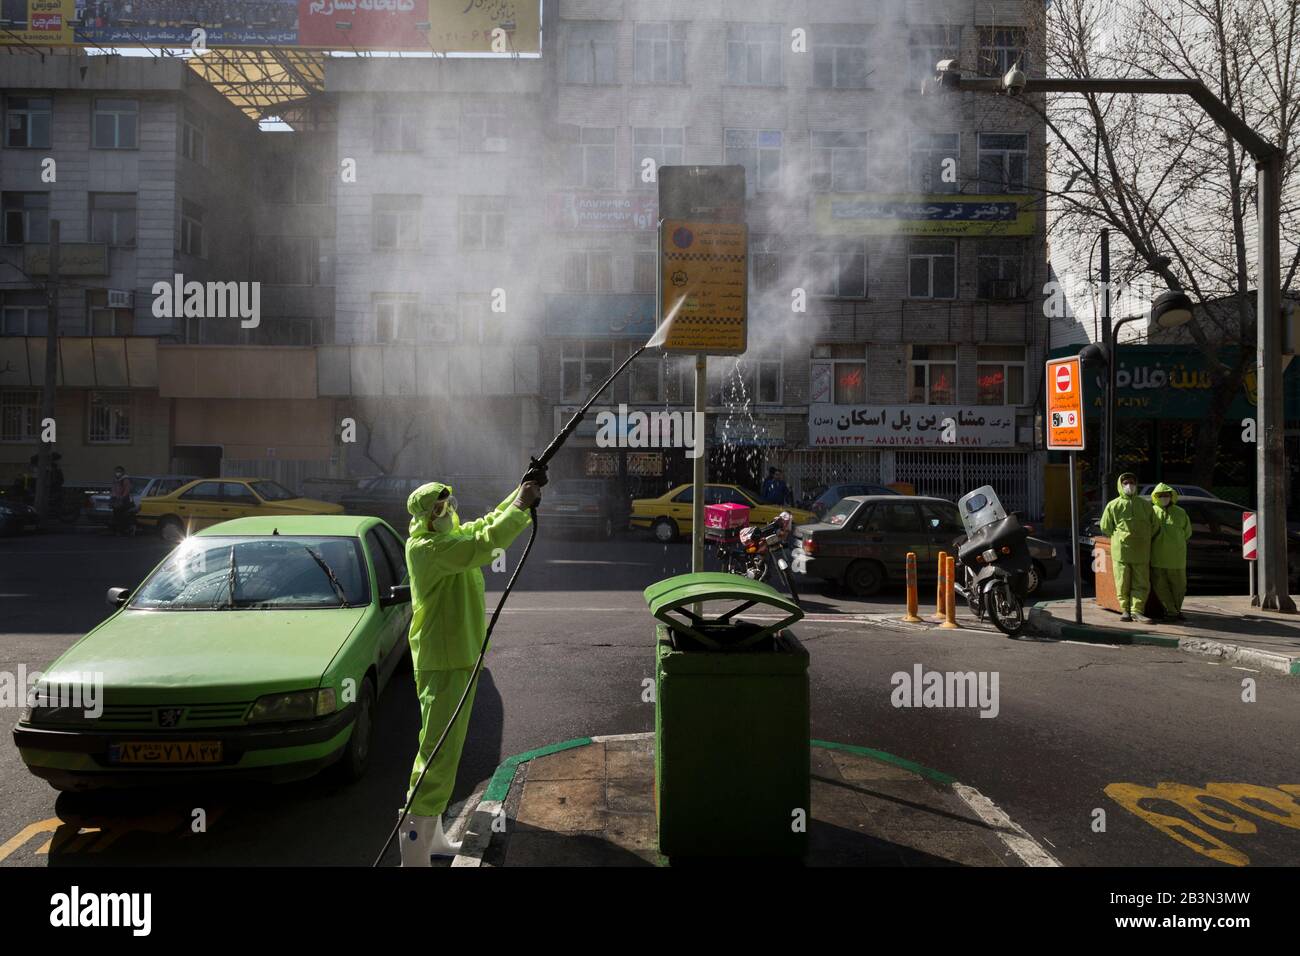 Tehran, Iran. 5th Mar, 2020. Iranian firefighters and municipality workers disinfect a street because of the new coronavirus (COVID-19) in northern Tehran, Iran. Iran today reported 15 new deaths from the novel coronavirus and 591 fresh cases in the past 24 hours, bringing the toll to 107 dead and 3,513 infected. Iran has one of the highest death tolls in the world from the new coronavirus outside of China, the epicenter of the outbreak. Credit: Rouzbeh Fouladi/ZUMA Wire/Alamy Live News Stock Photo